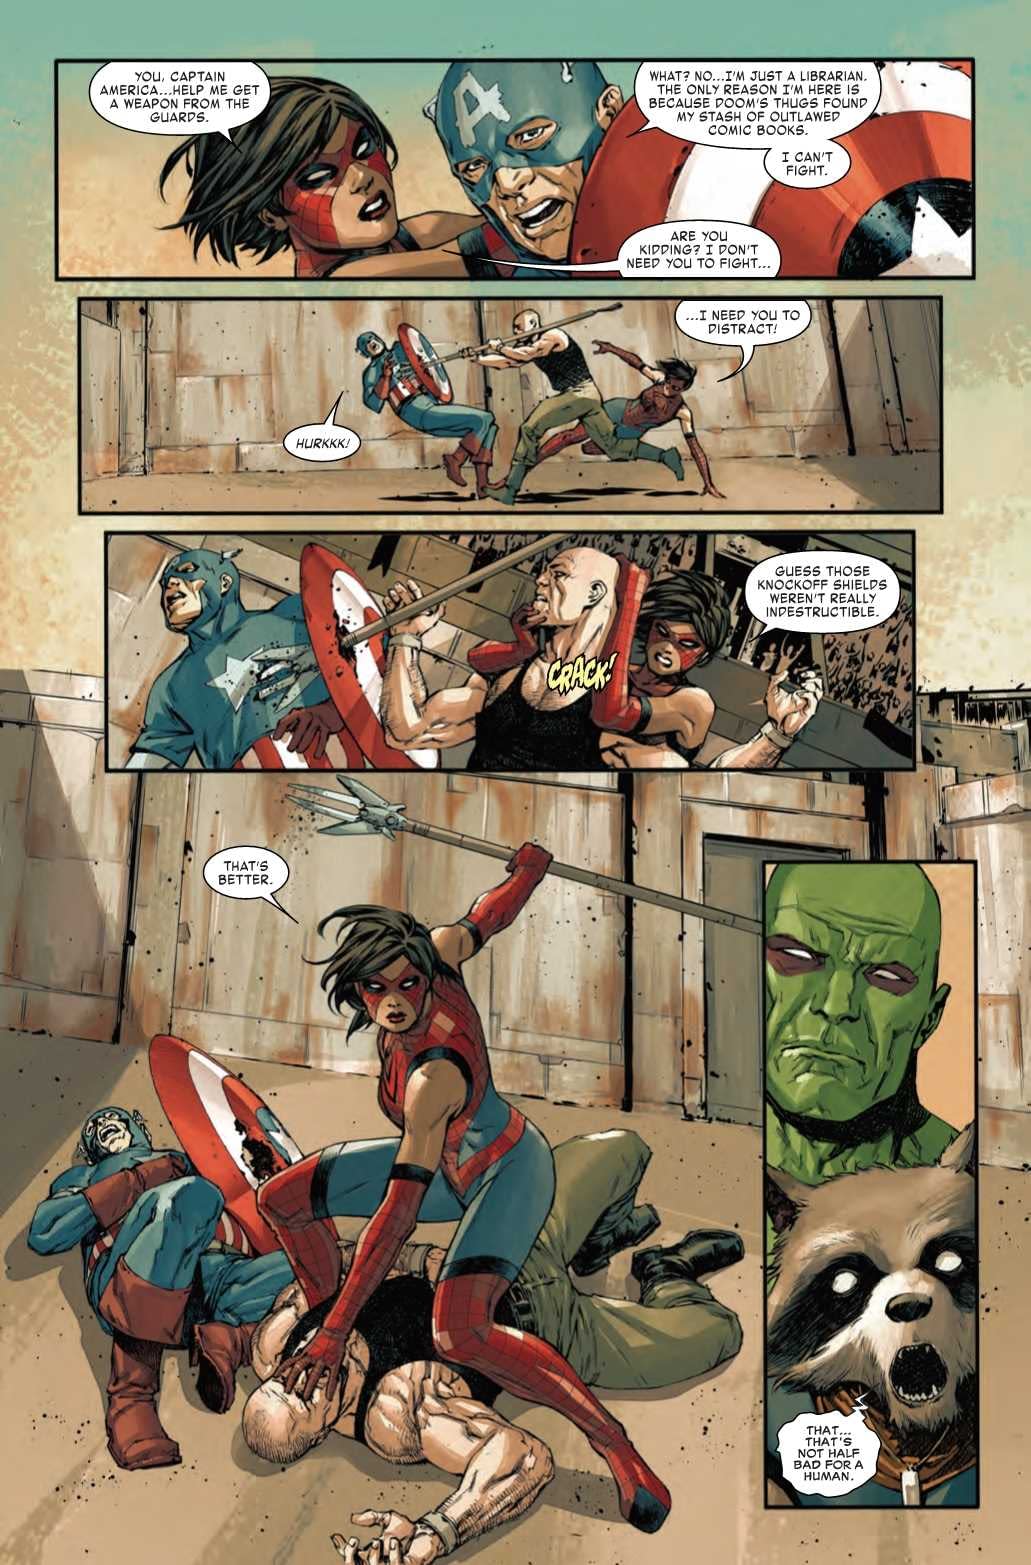 The Deaths of Thor, Captain Marvel, and Captain America - Old Man Quill #4 Preview (Spoilers)